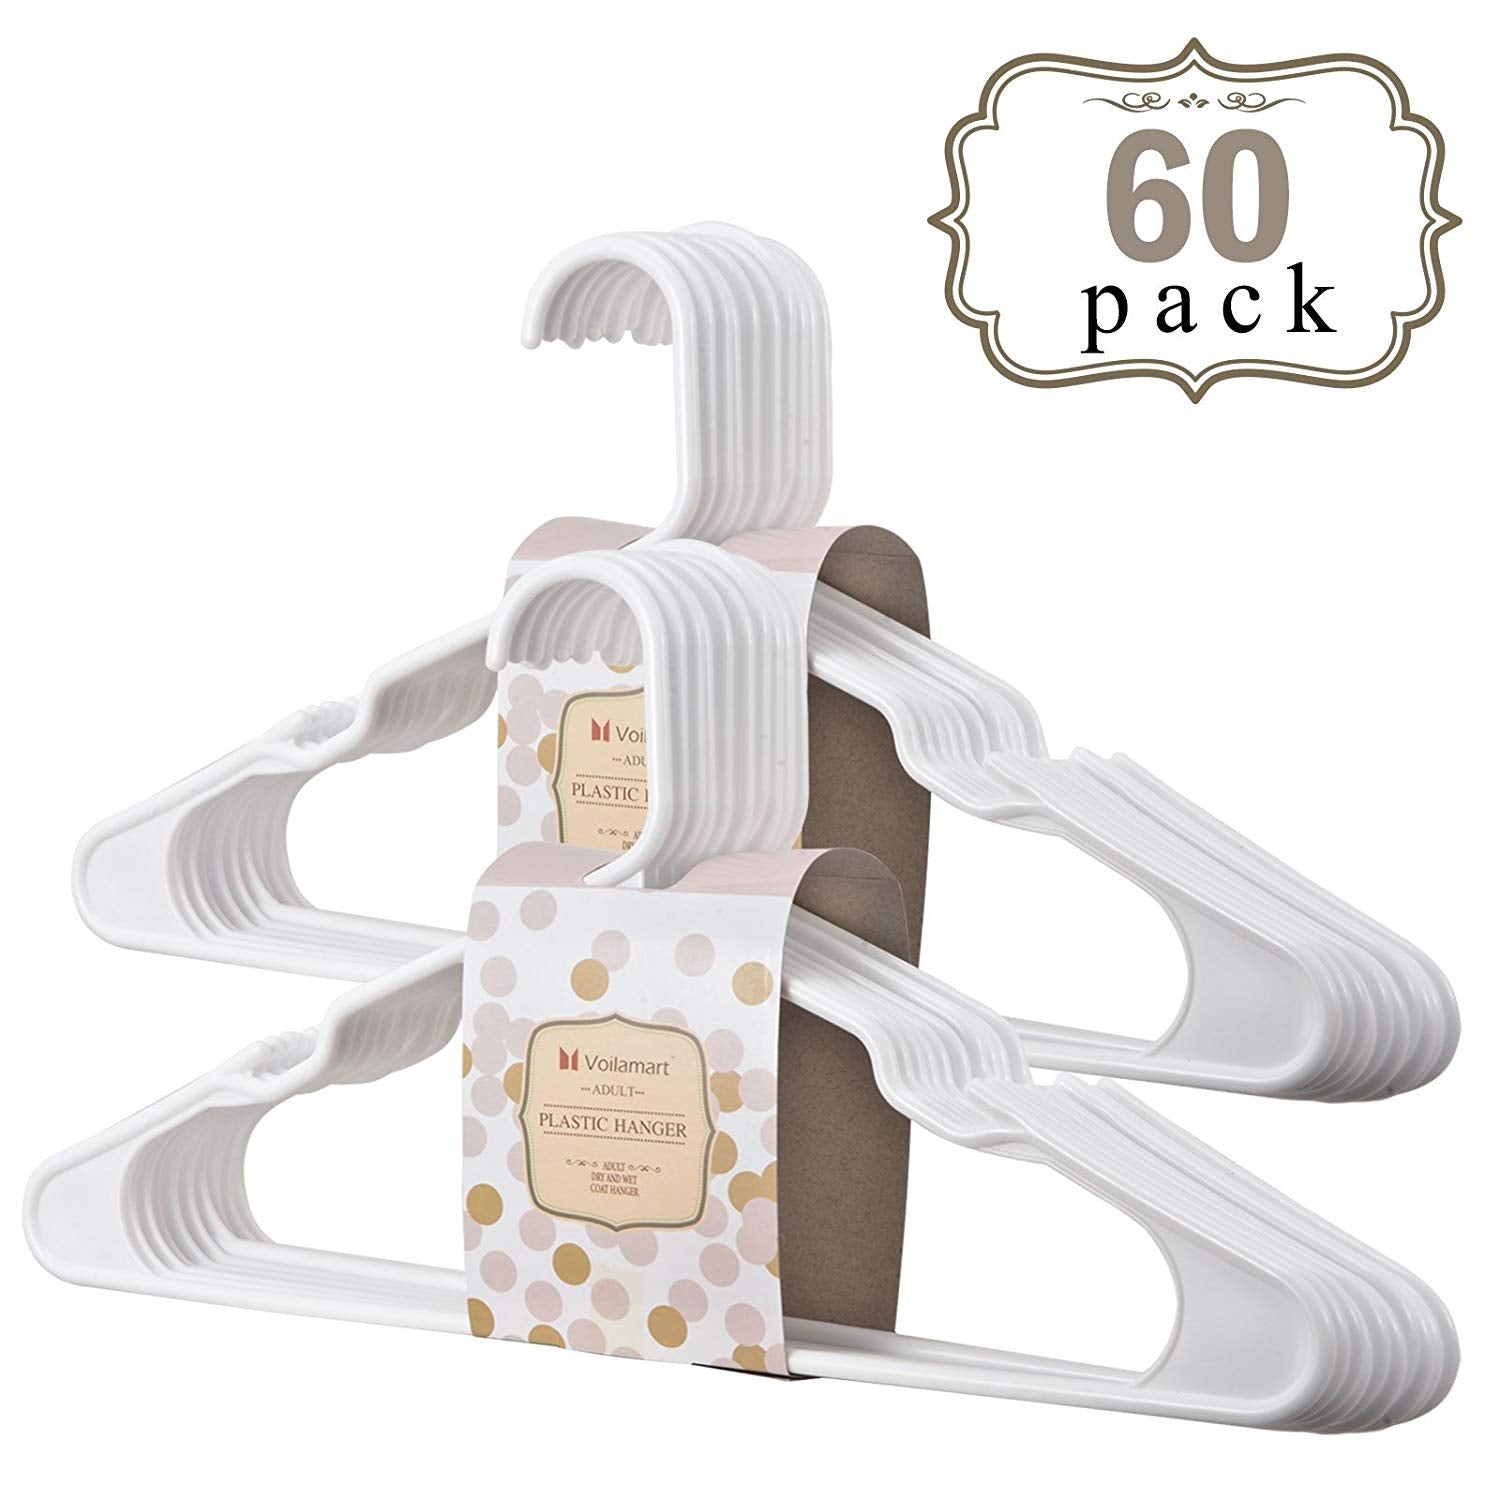 Voilamart Plastic Clothes Hangers Pack of 60, Adult Size Hanger with Trouser/Skirt/Bar Hooks, Perfect for Shirt Coat Dress Suit, 16.3", White